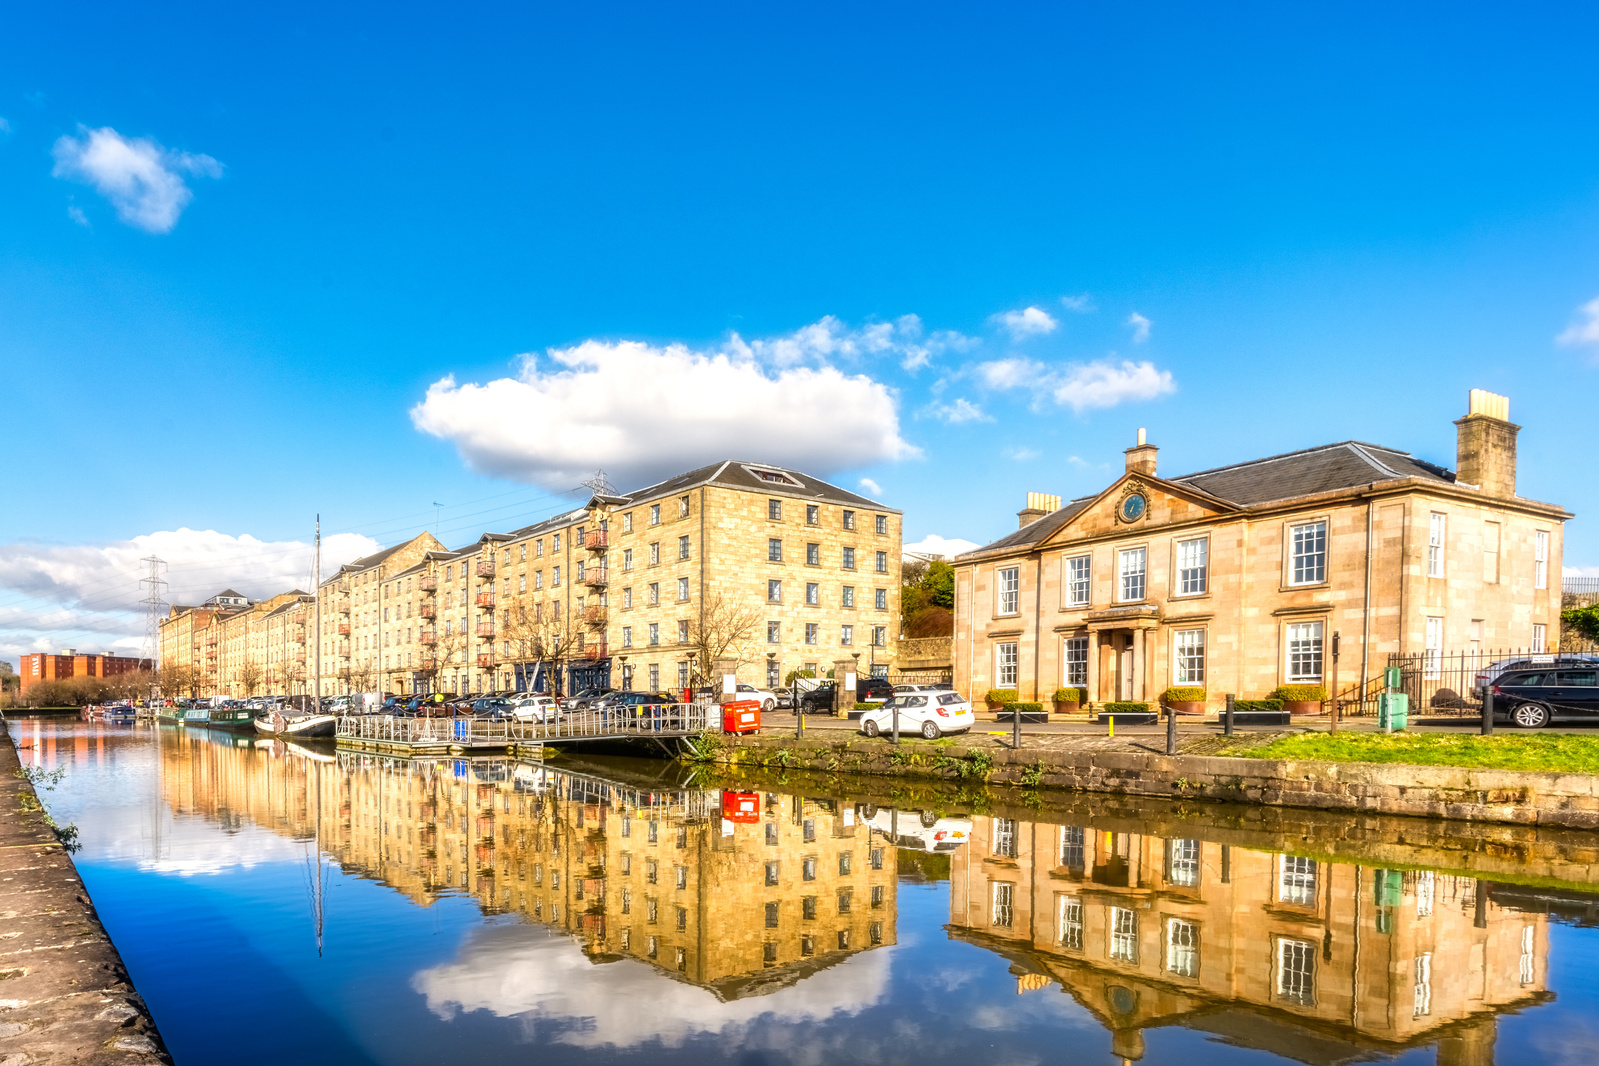 Buildings in front of river for Scotland Exterior HDR Property - Photography by Nate Cleary